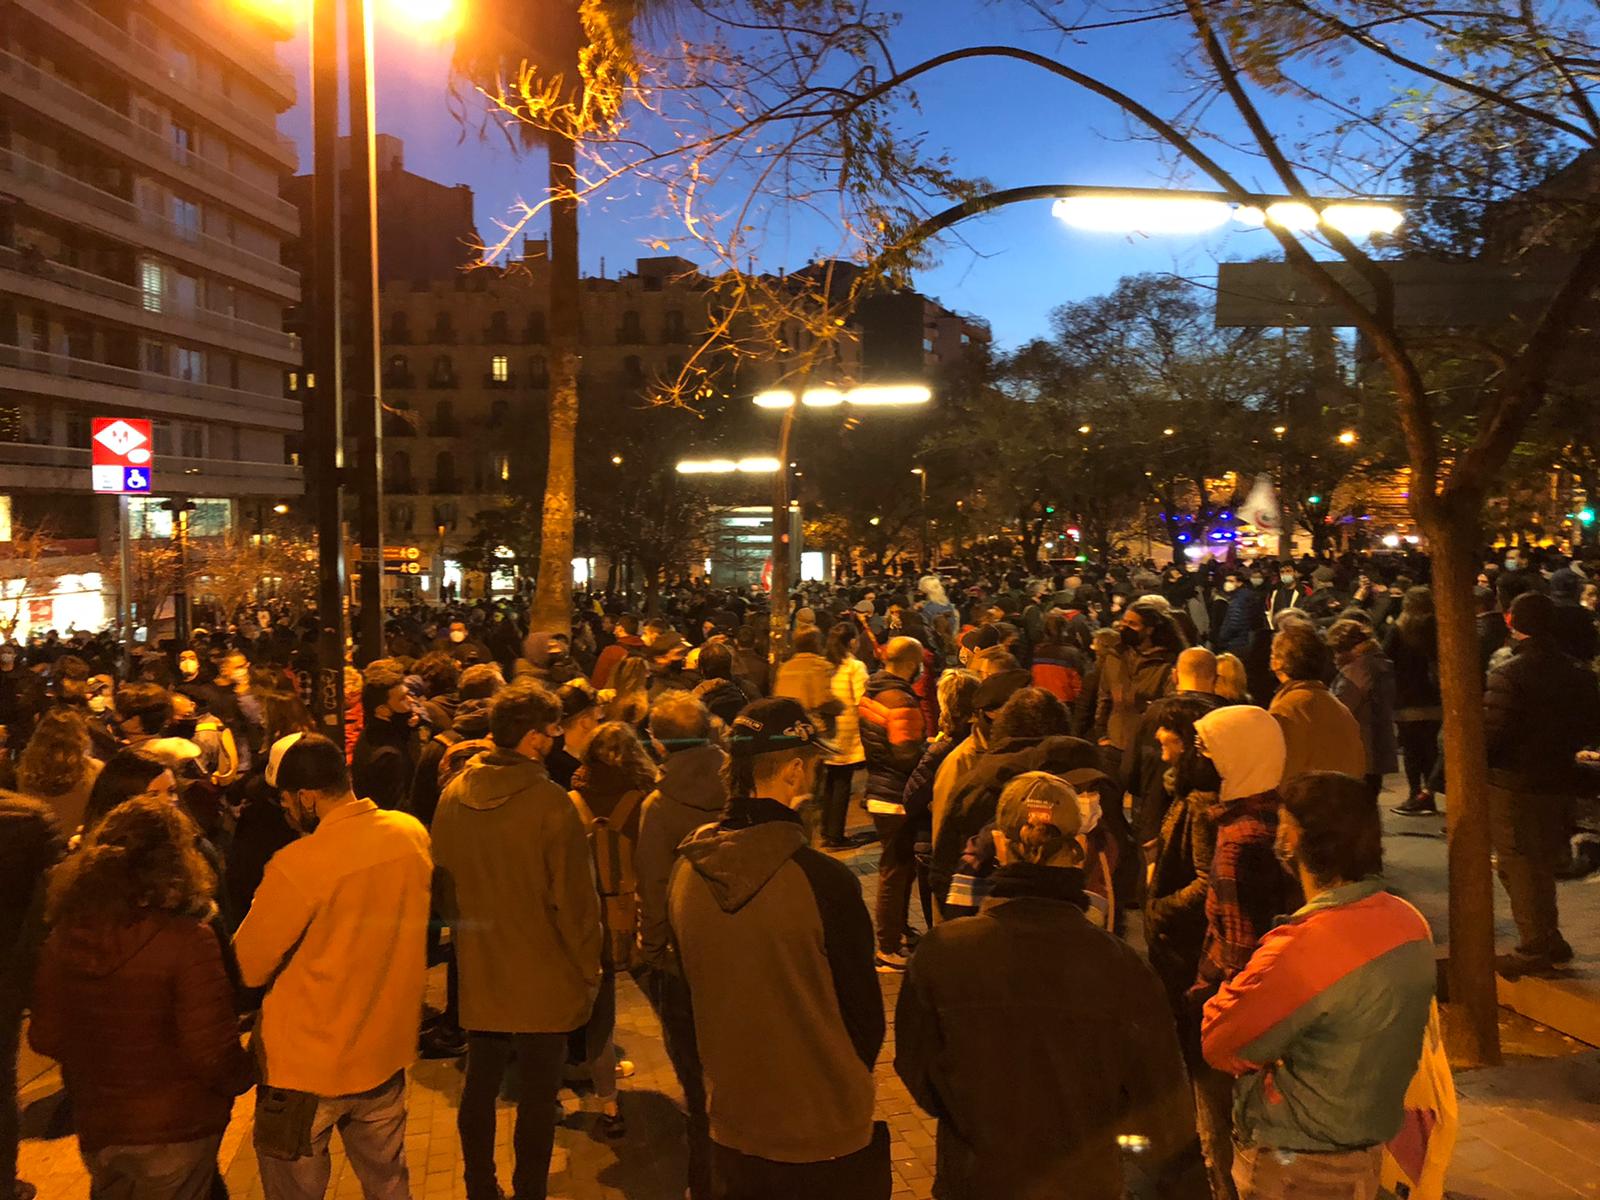 Hundreds of people gather to protest against the arrest of Pablo Hasél, the rapper sentenced to prison for the content of some tweets and lyrics (by Alan Ruiz Terol)